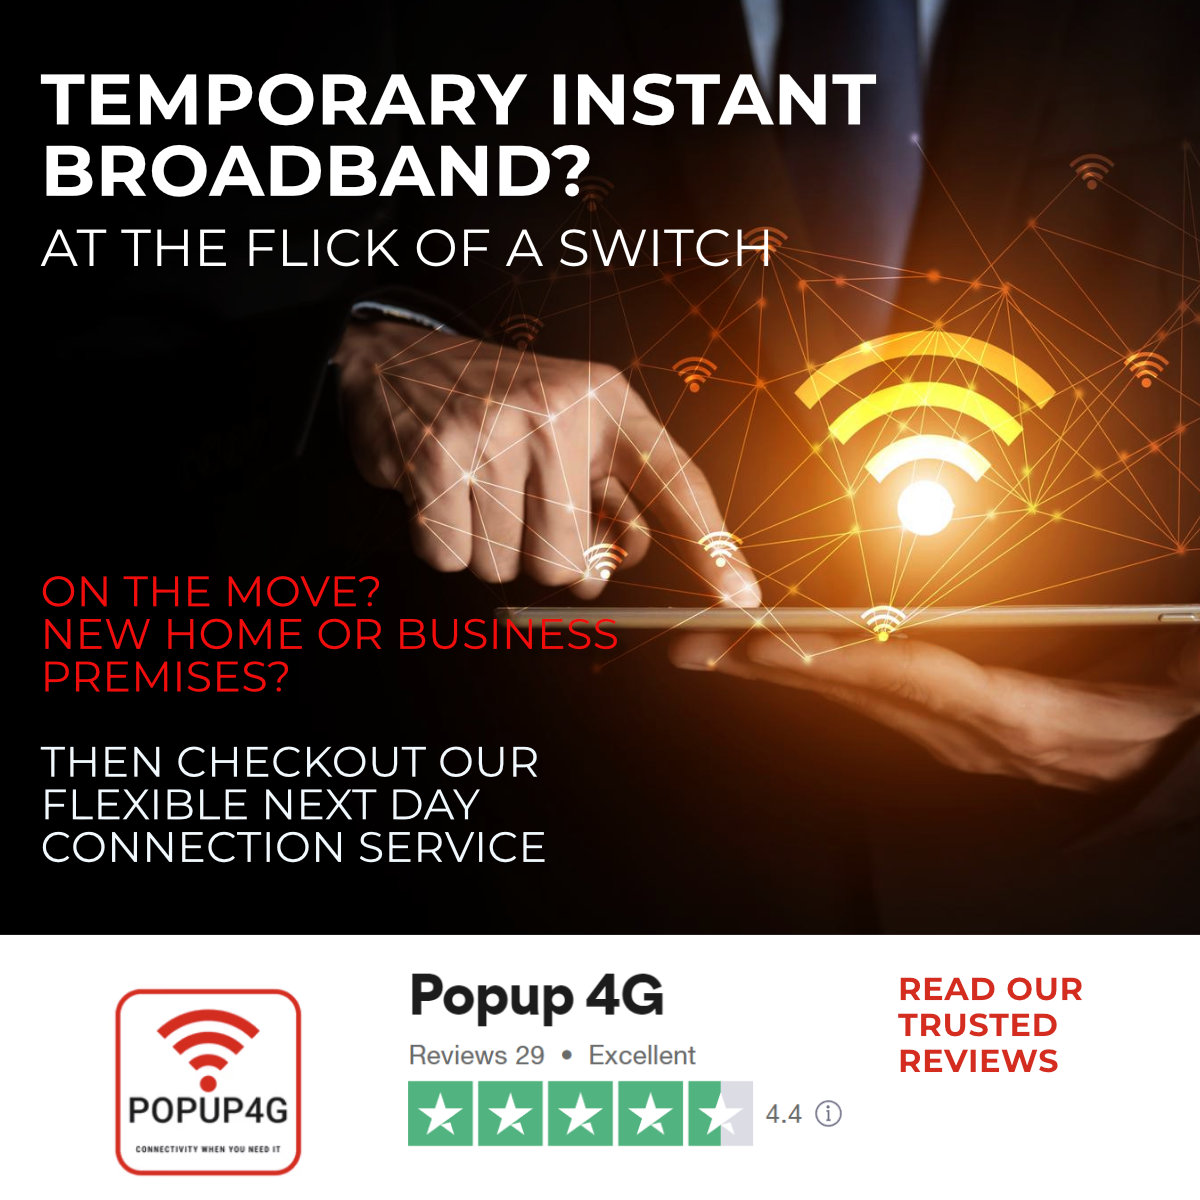 Need quick instant broadband at the flick of a switch? Are you working remotely? Home office?  Then check out our mobile broadband solutions for instant connection.
Visit us at: popup4g.com
#workremotely
#broadband
#temproarybroadband
#broadbandinternet